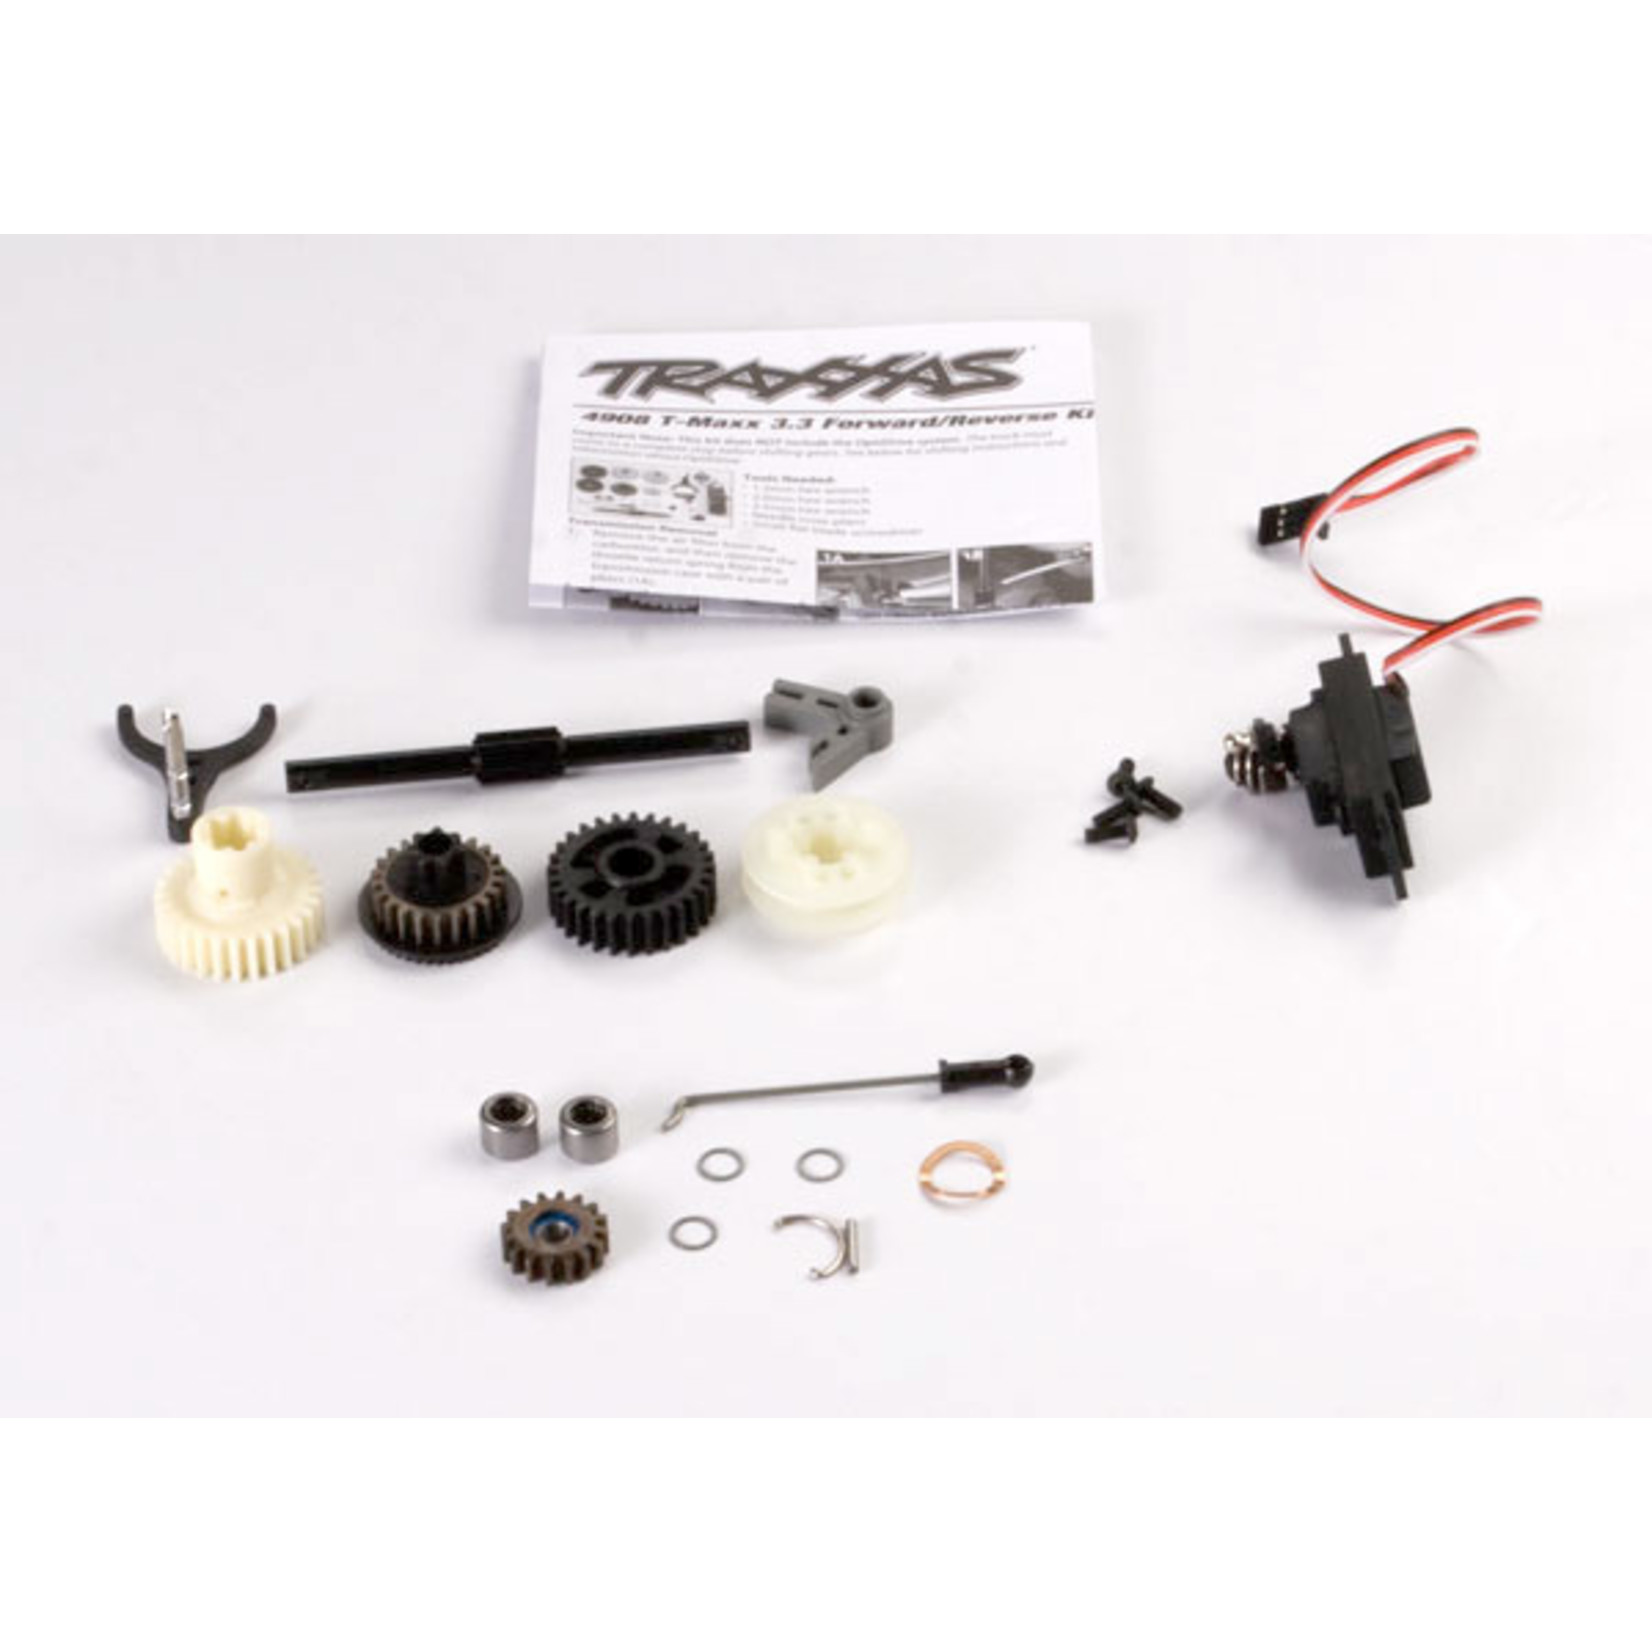 Traxxas 4995X - Reverse upgrade kit (includes all componen